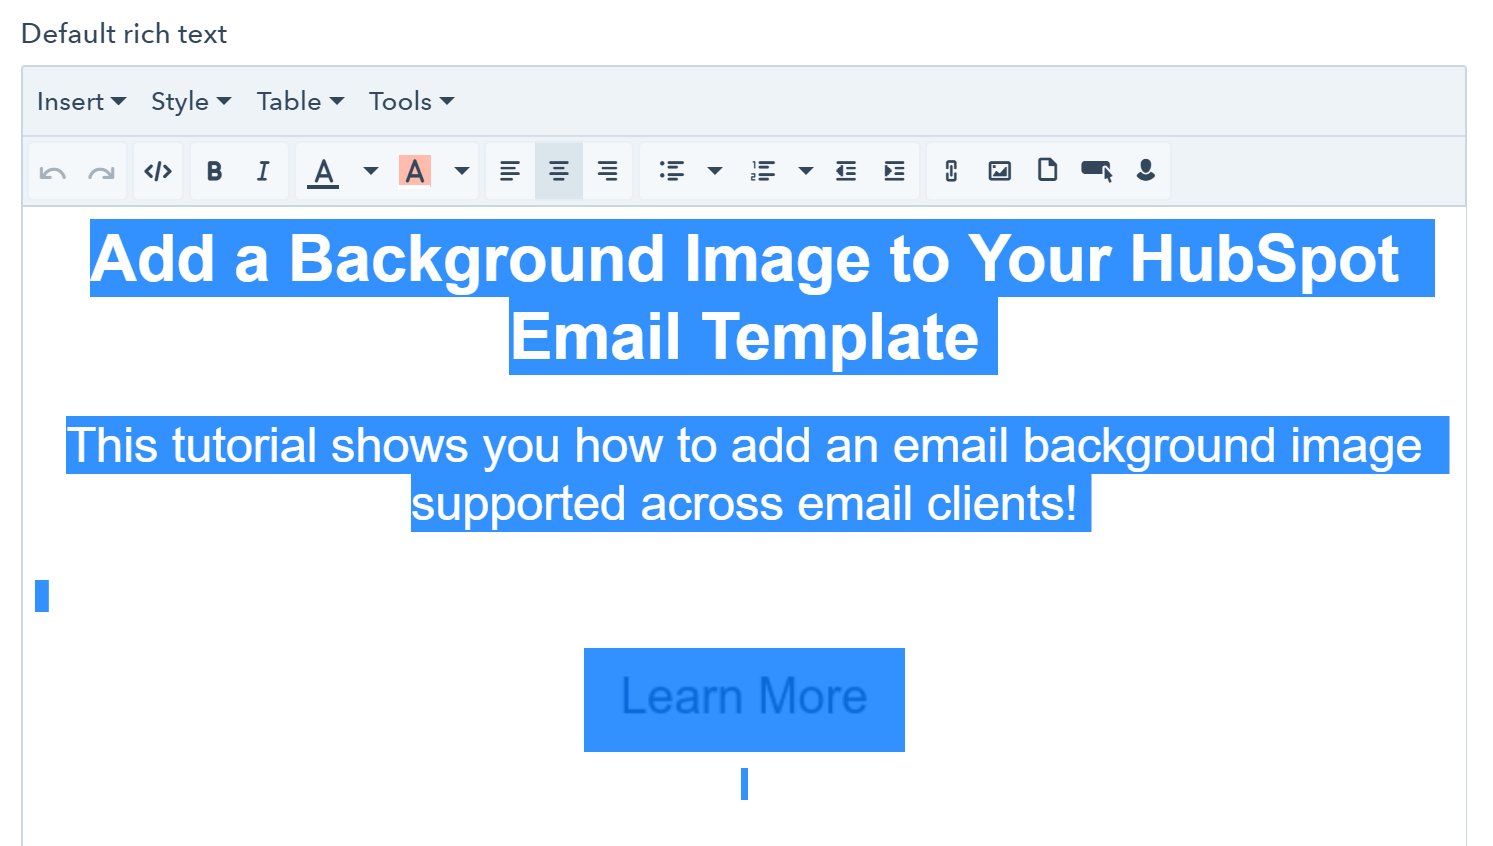 Add a background image to your HubSpot email template